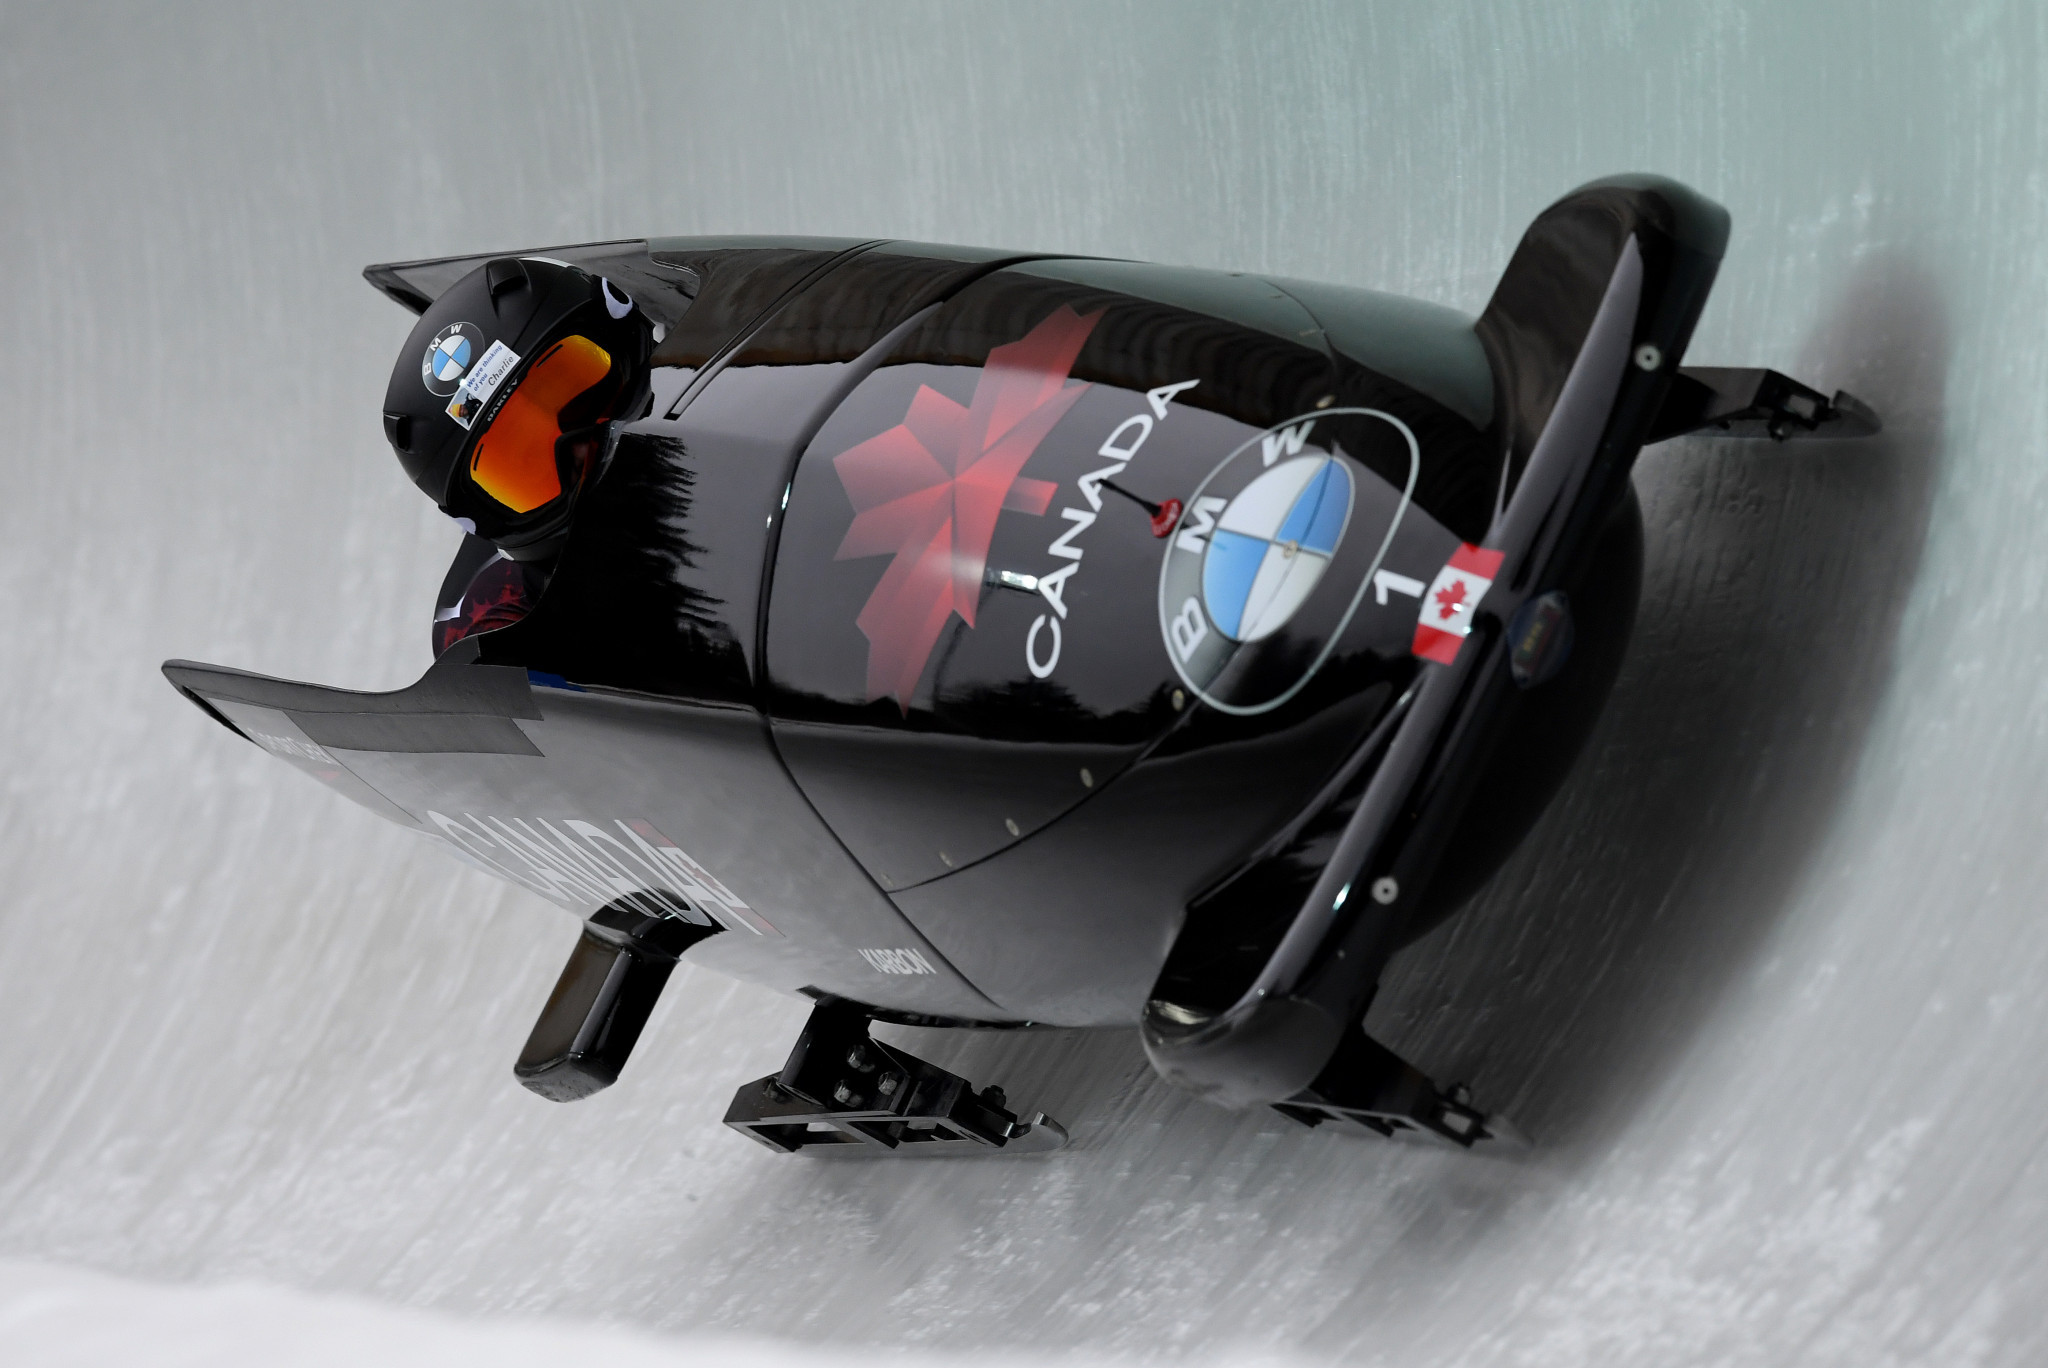 Canadian bobsleigh and skeleton team launch Olympic season in Toronto